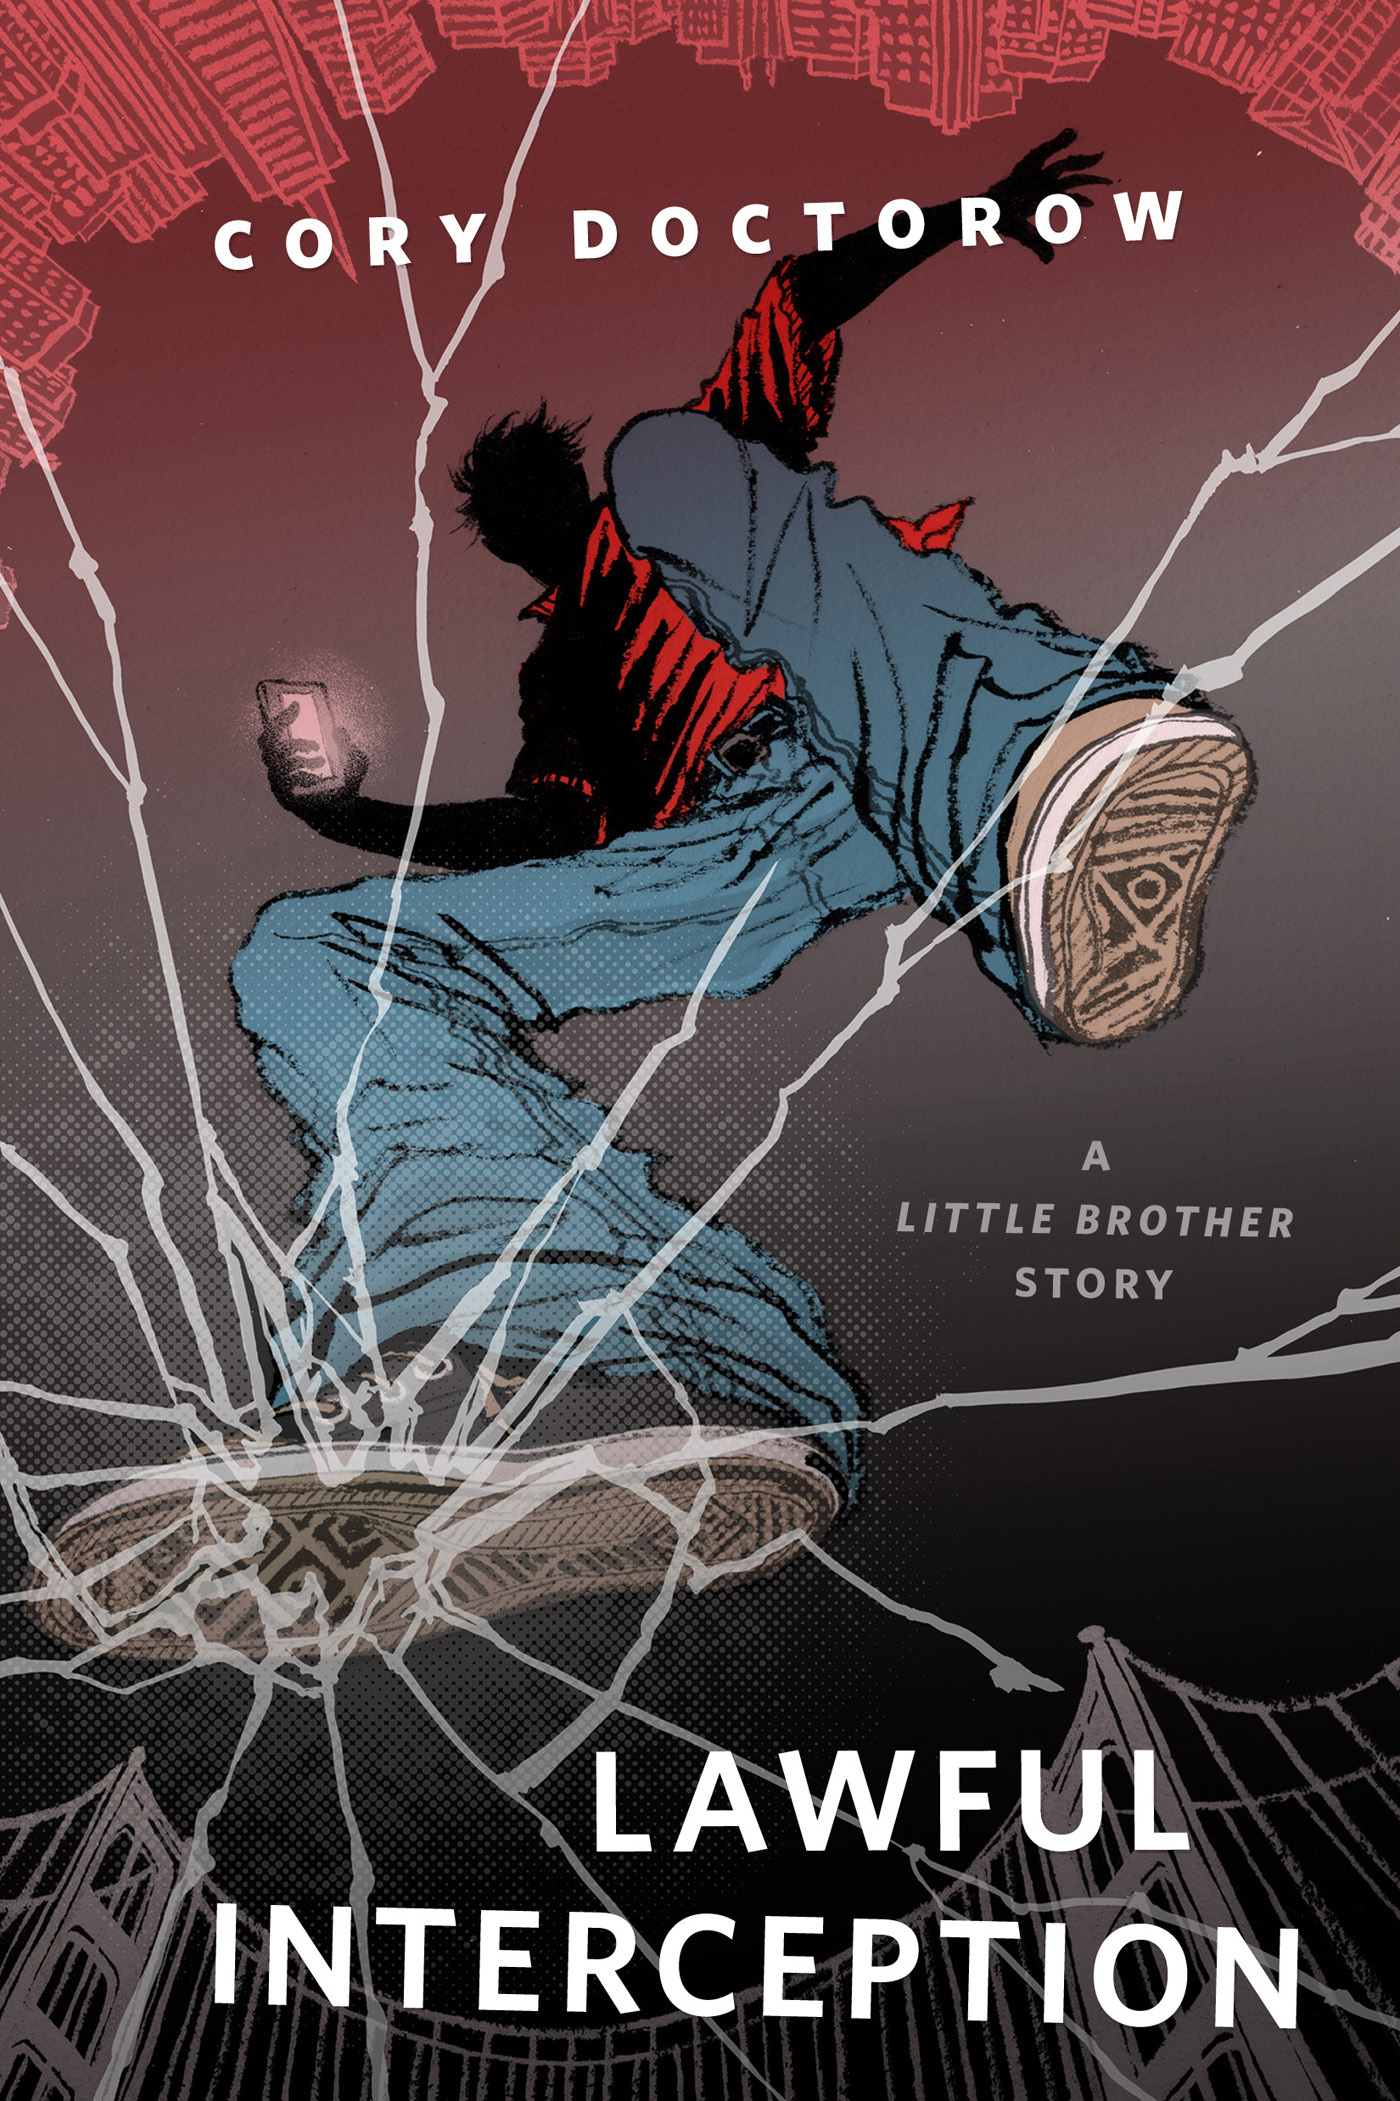 Lawful Interception : A Tor.Com Original Little Brother Story by Cory Doctorow